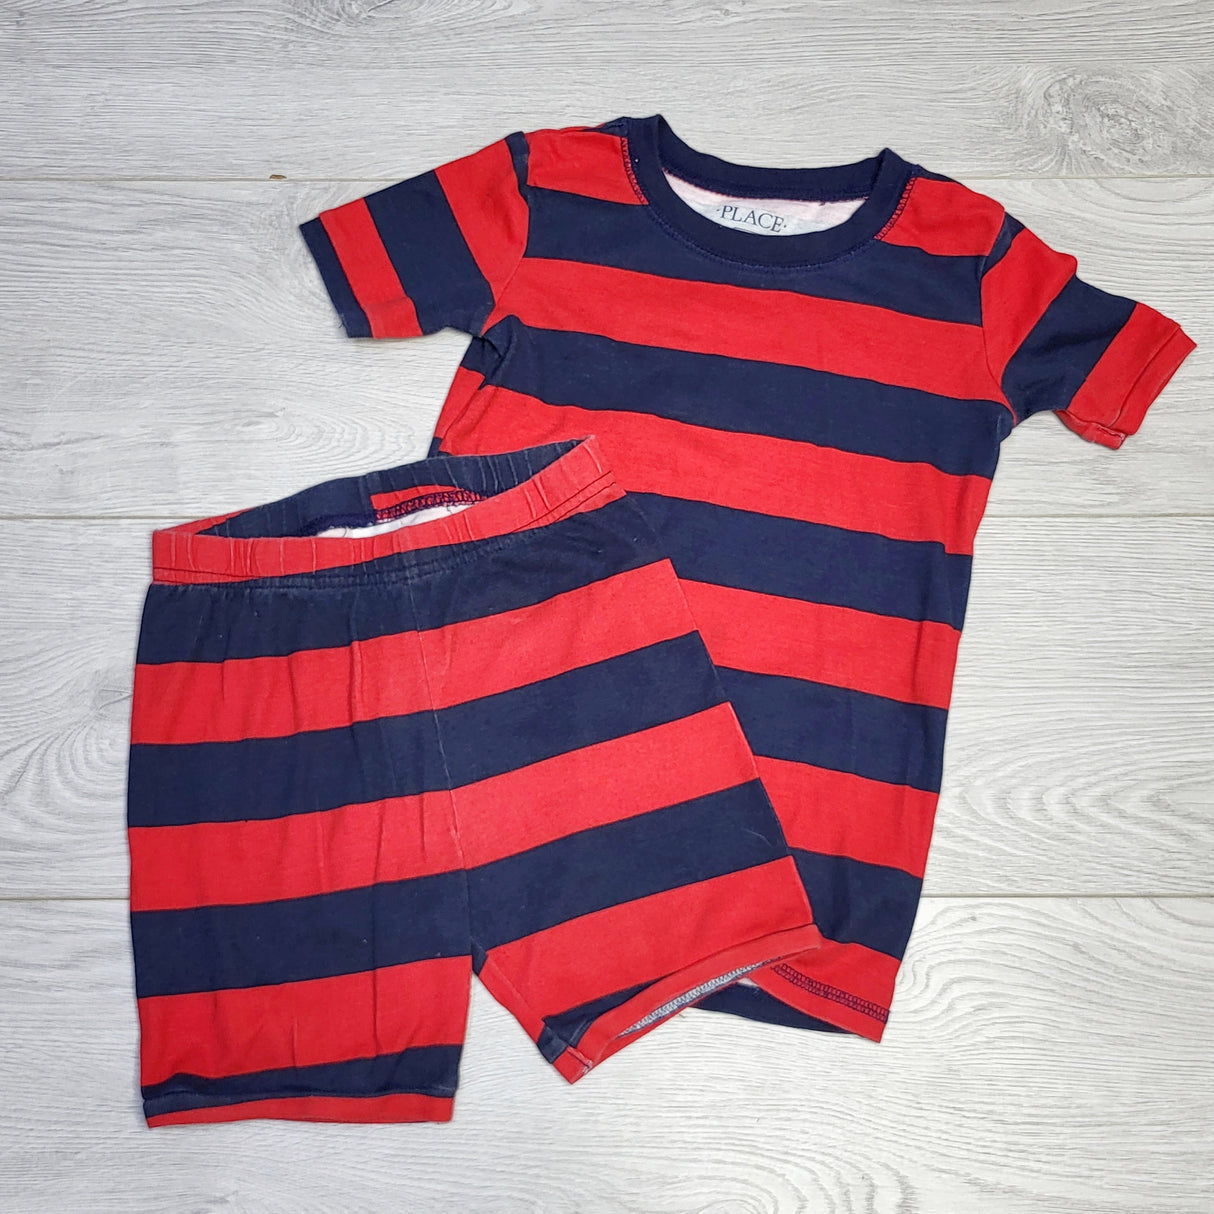 SPLT2 - Children's Place red and navy striped 2pc cotton PJs, size 7